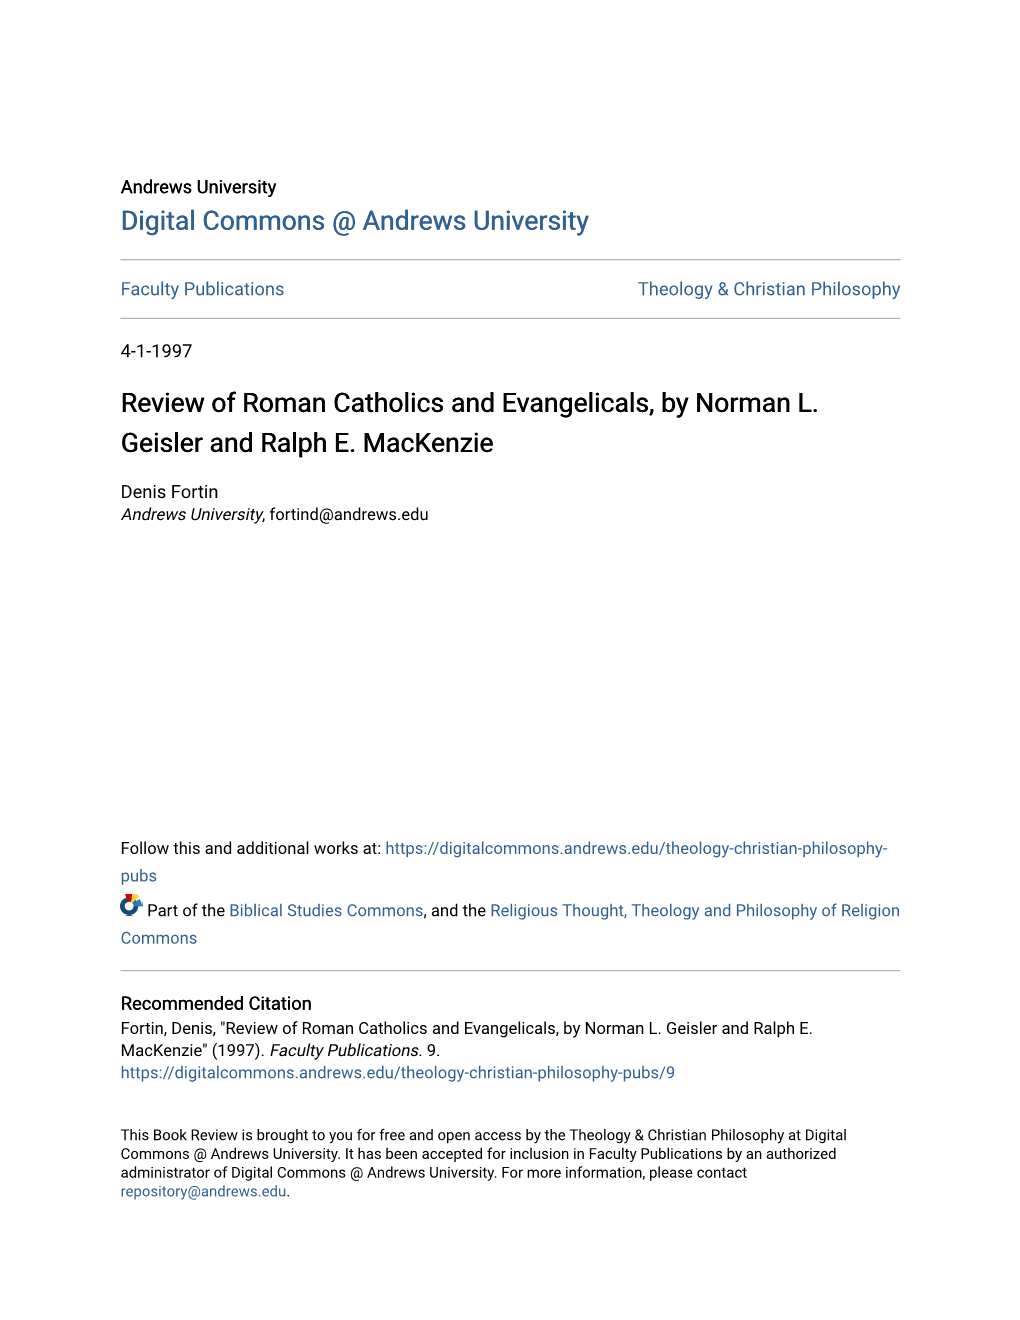 Review of Roman Catholics and Evangelicals, by Norman L. Geisler and Ralph E